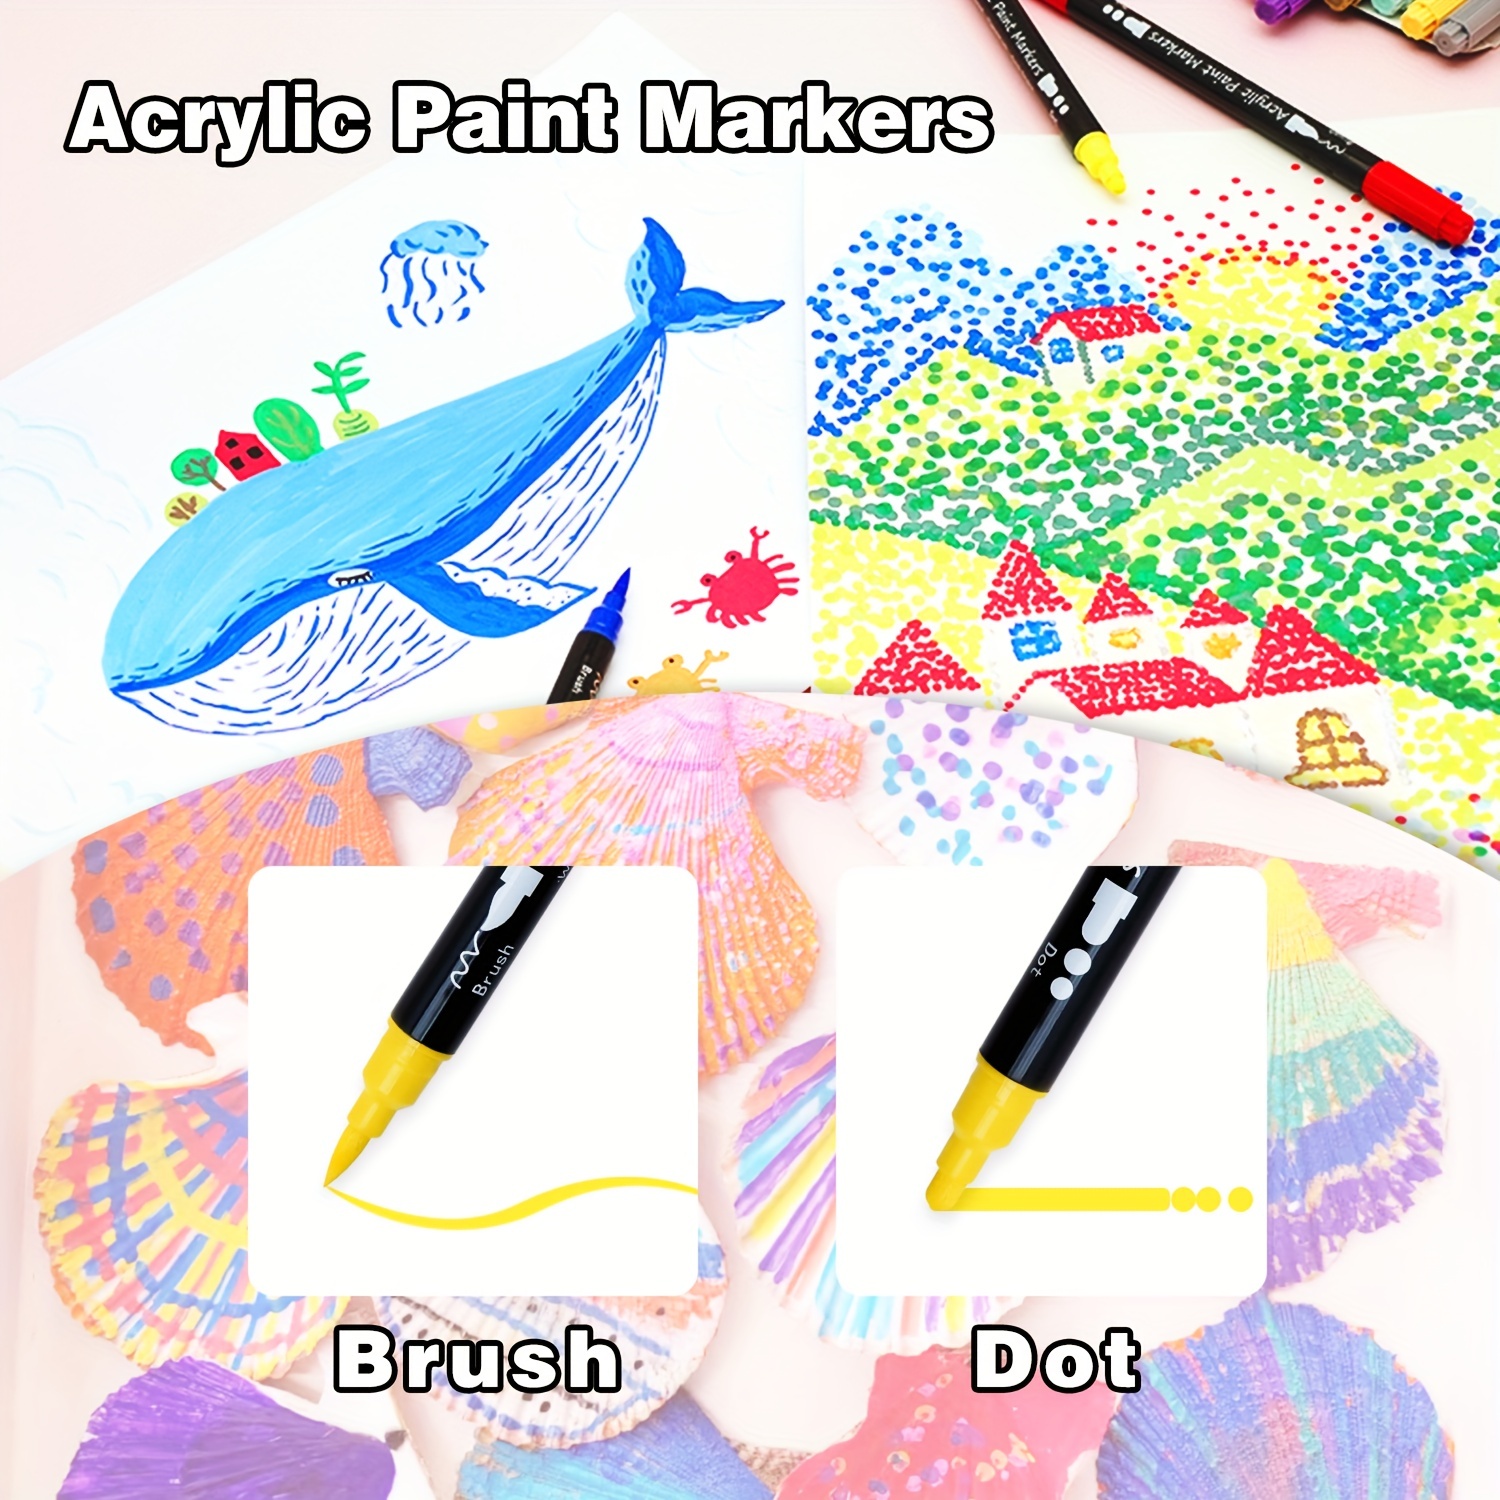 Acrylic Paint Set 24 Colors by Crafts 4 All Perfect for Canvas, Wood, Ceramic